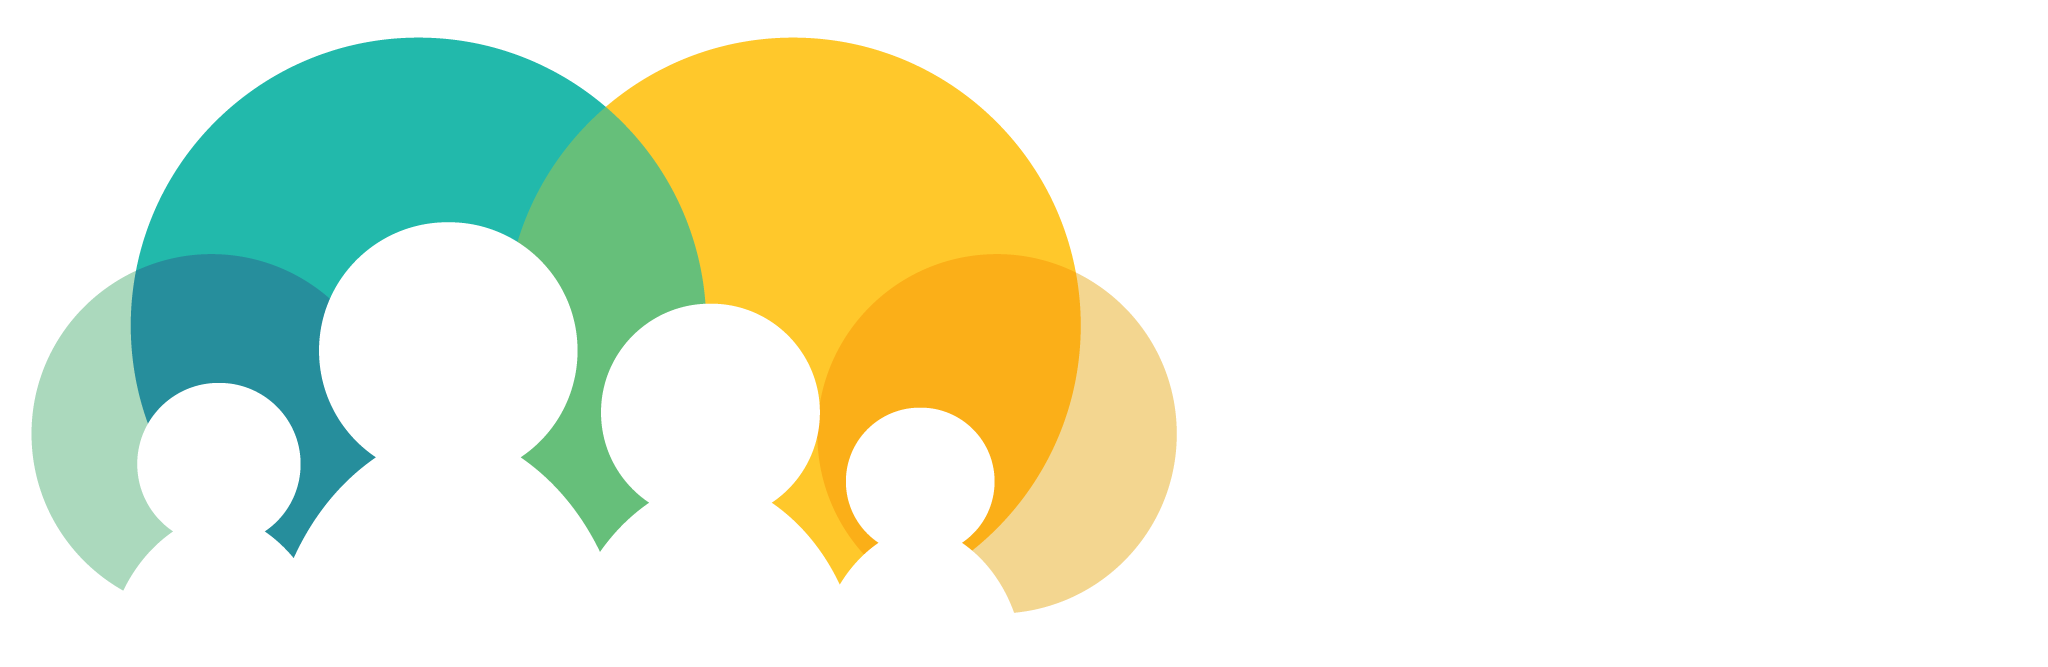 Bayside Community Hub Business Directory Locals Supporting Each Other